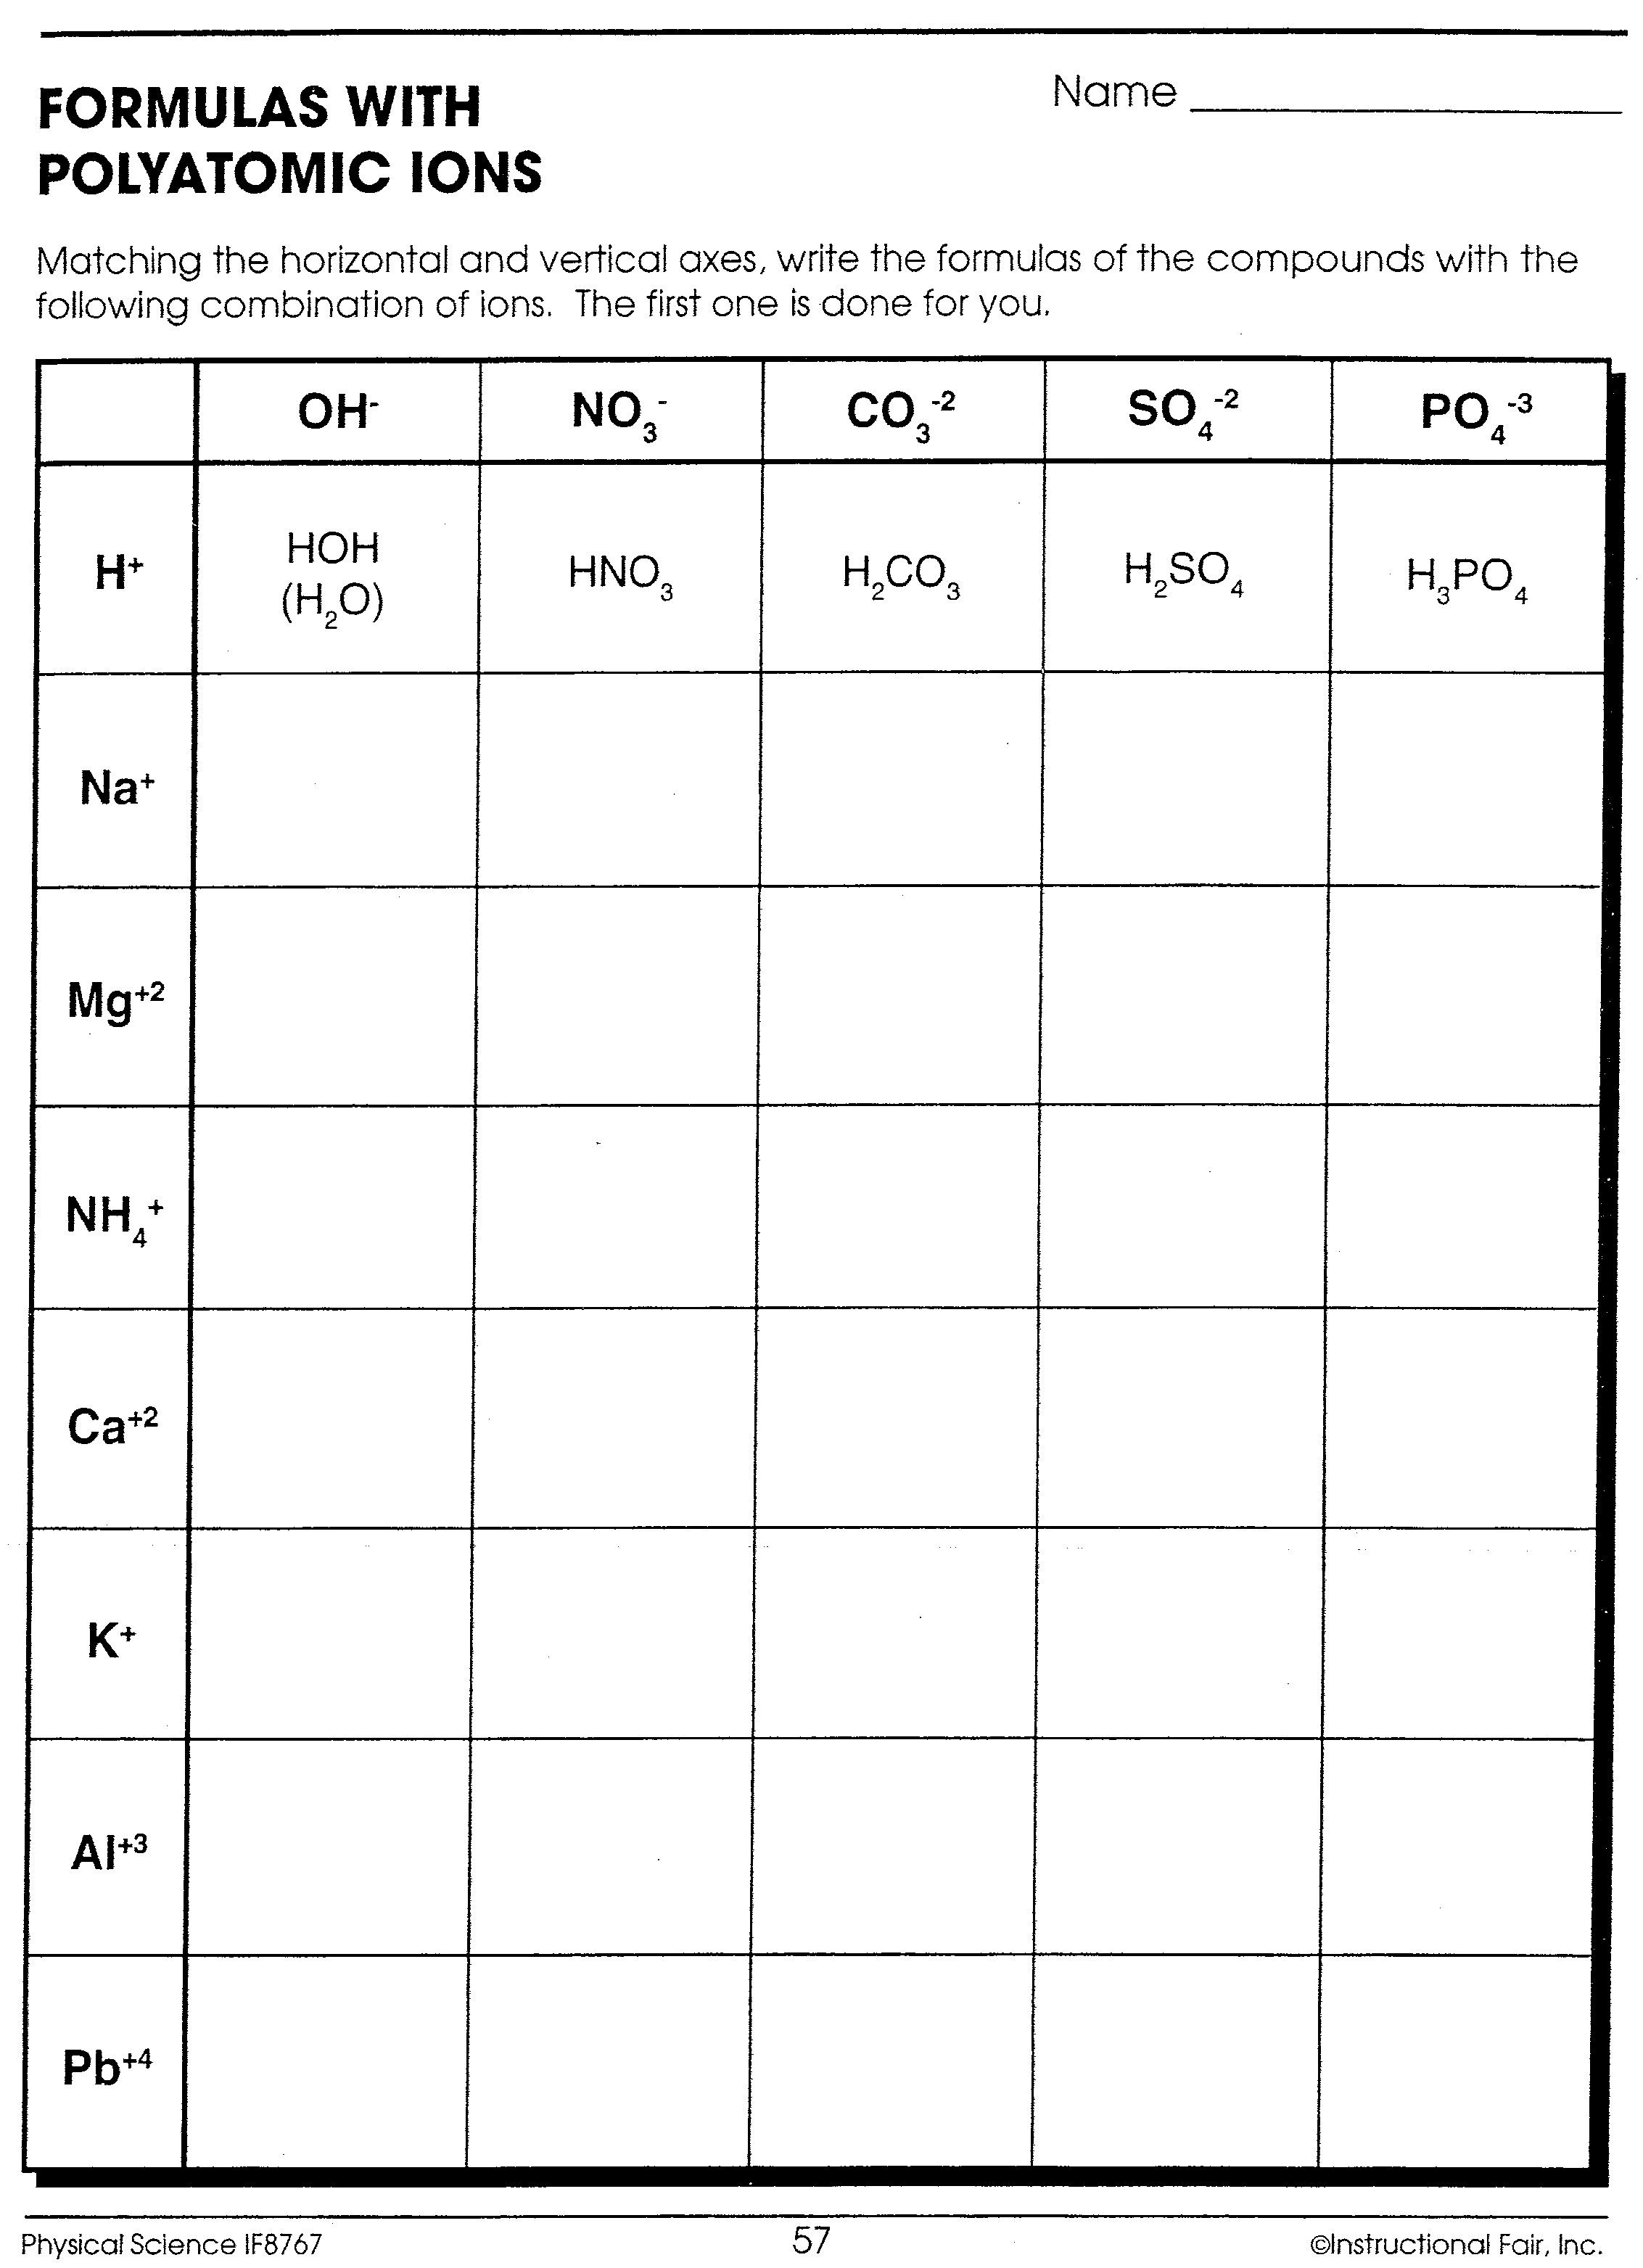 awesome-polyatomic-ions-reference-sheet-teaching-chemistry-chemistry-lessons-chemistry-education